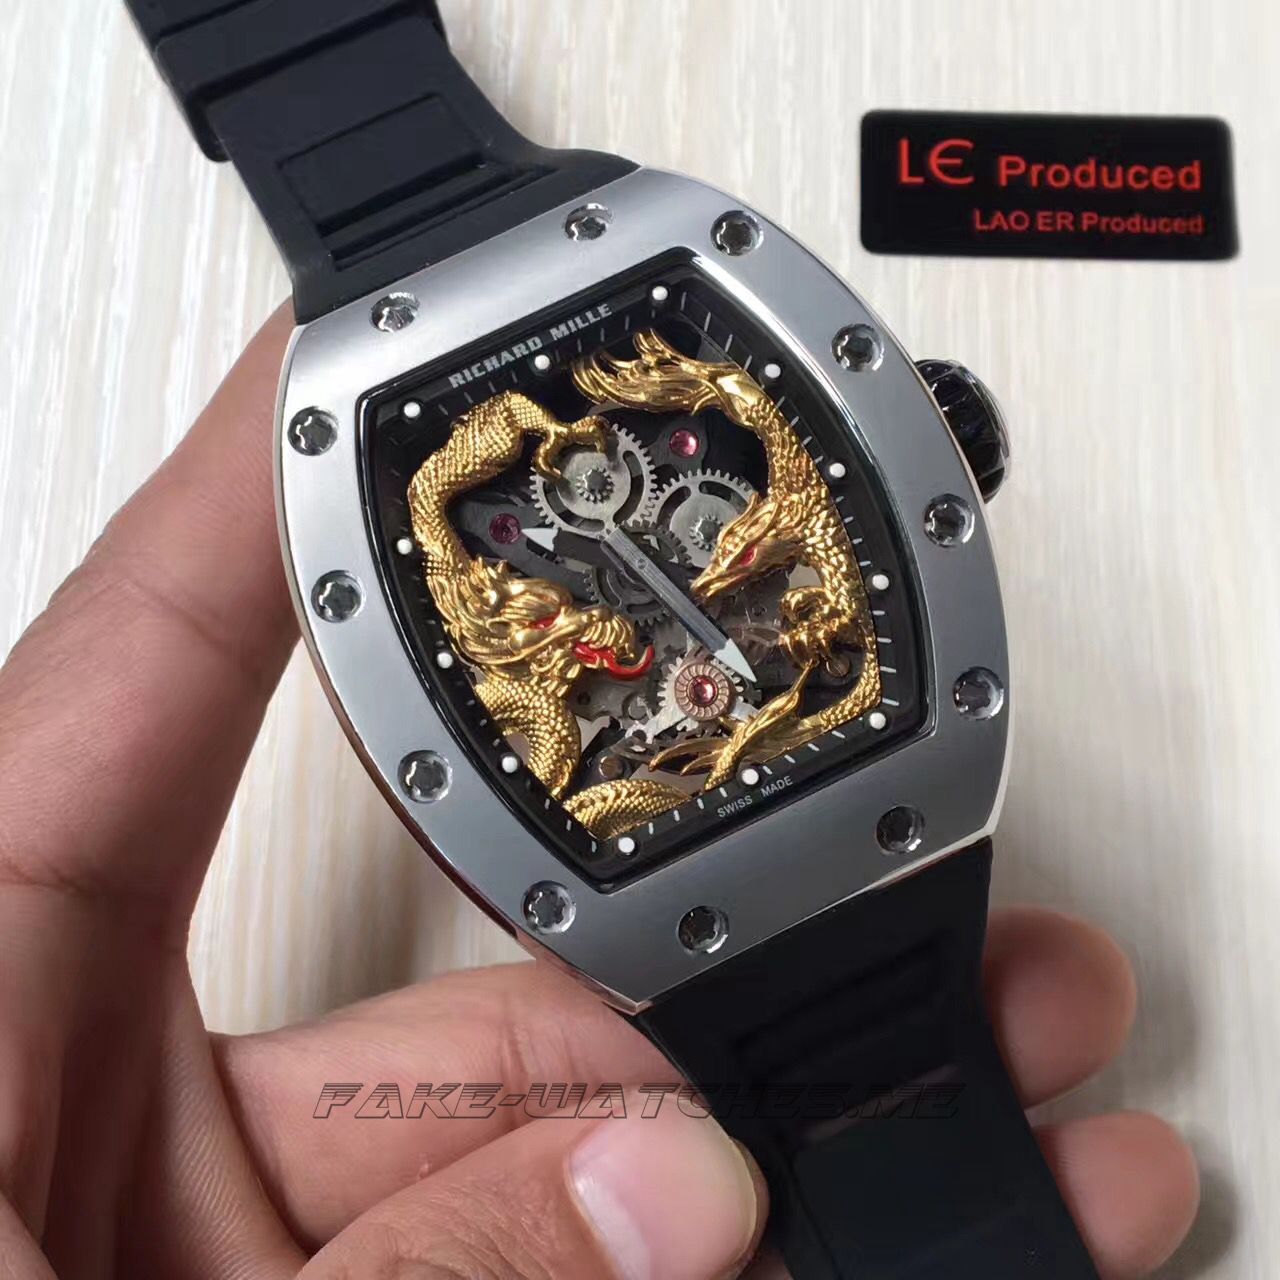 Richard Mille RM57-01 Jackie Chan Stainless Steel Yellow Gold Dial